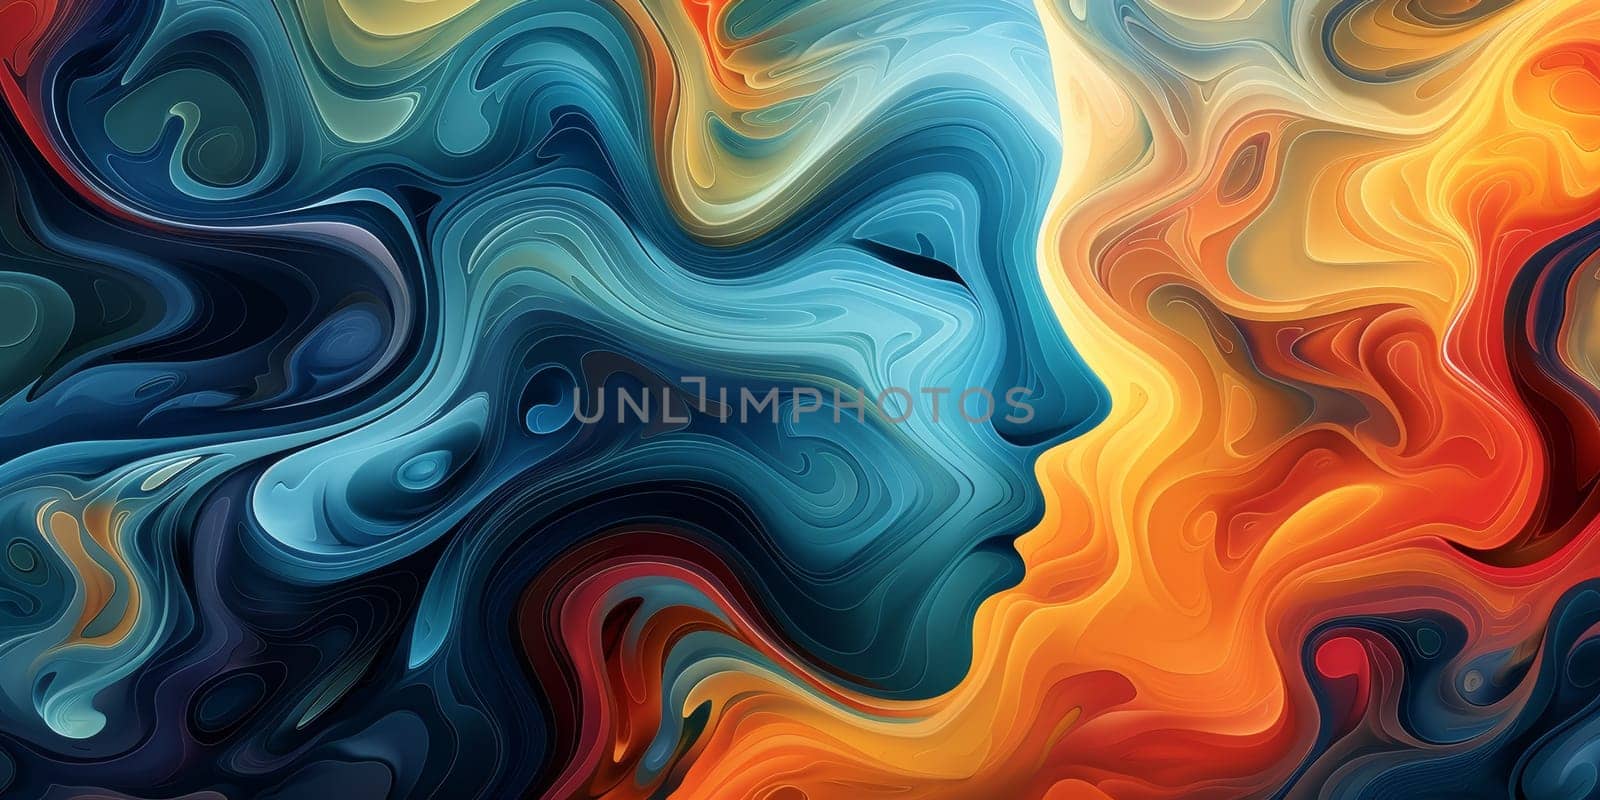 A colorful abstract painting of a woman's face with swirls, AI by starush